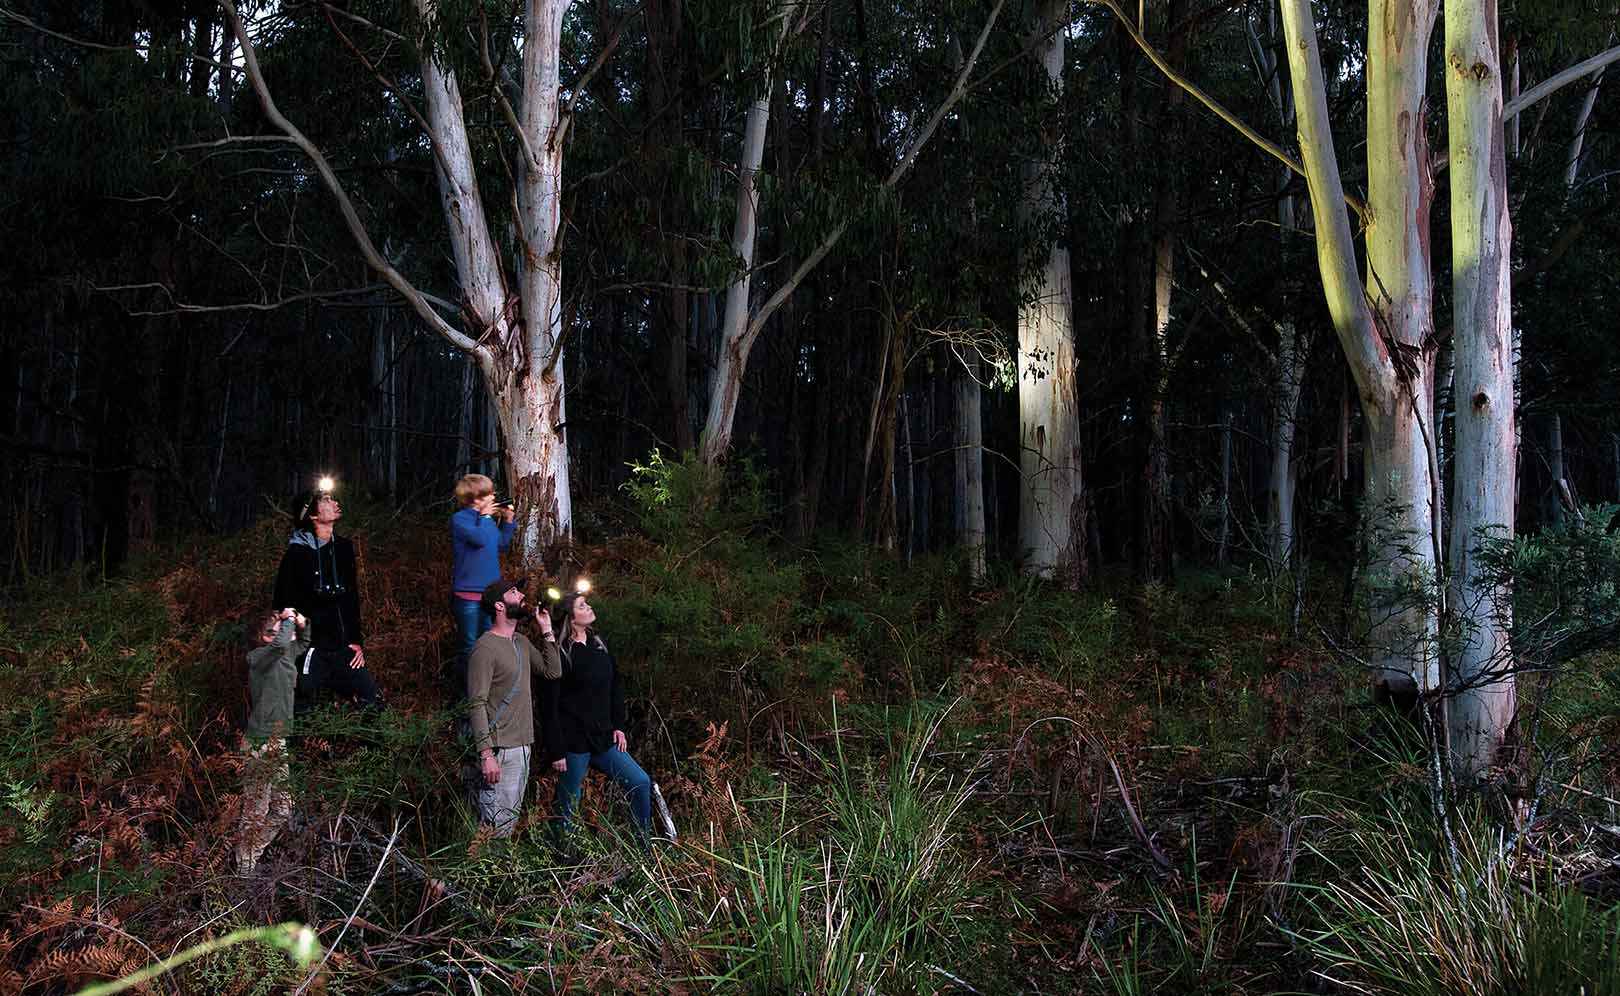 From left, Ari, Ziggy and Manu Scheltema, Brad Blake and Lindsey Dobeson spotlighting for greater gliders in the Wombat Forest near Trentham.